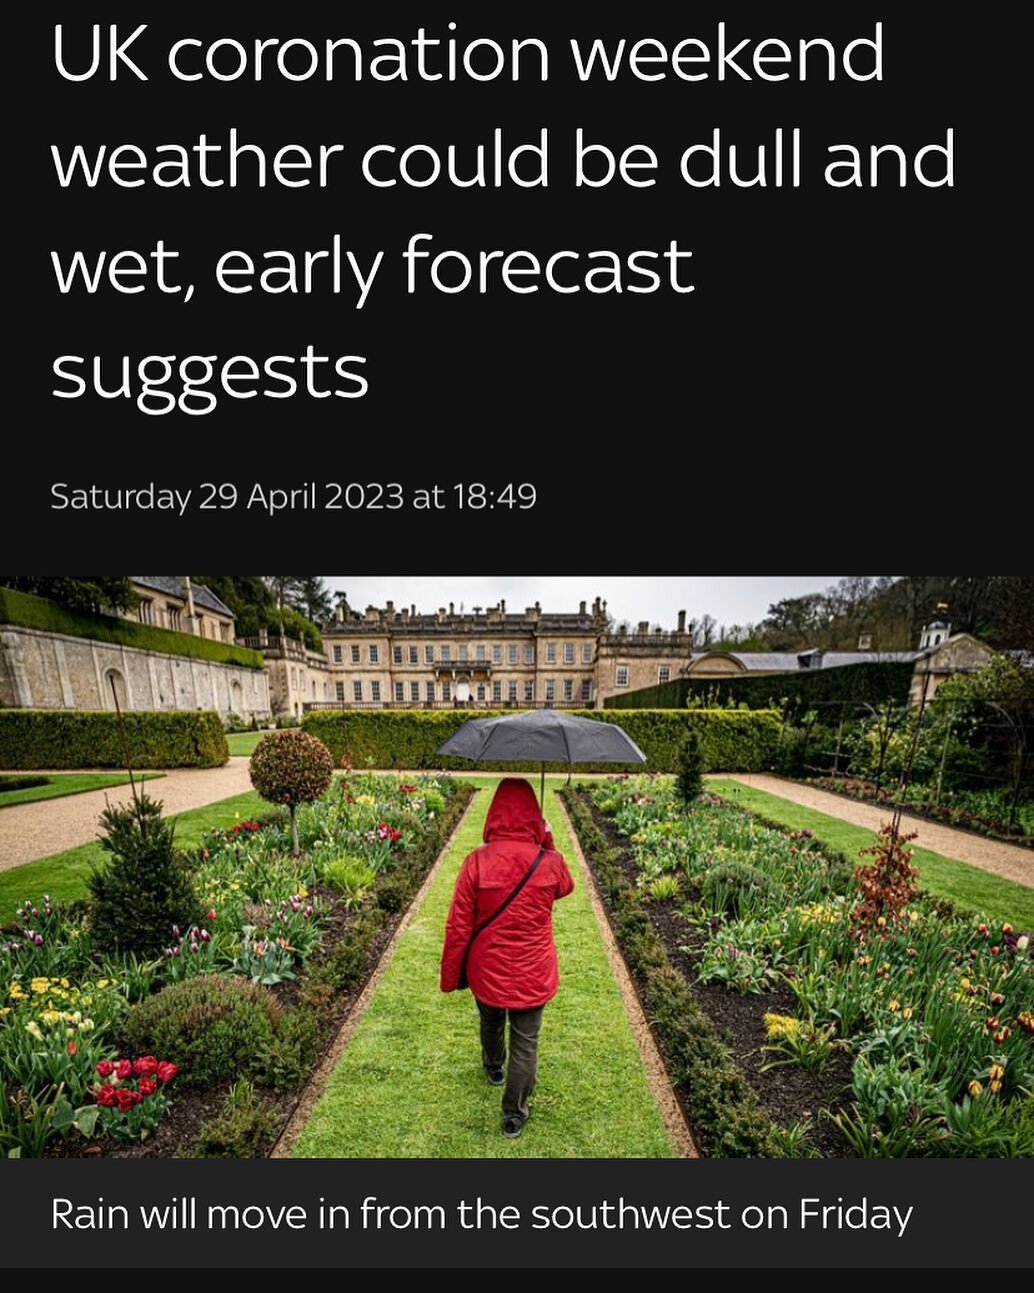 We&rsquo;ve just read that the powers that be predict next weekend to be &ldquo;dull and wet&rdquo;. Most people would say that&rsquo;s a bad thing. 
-
To us&hellip;that&rsquo;s a English Summer Day!!
-
In this great country I have seen people play t